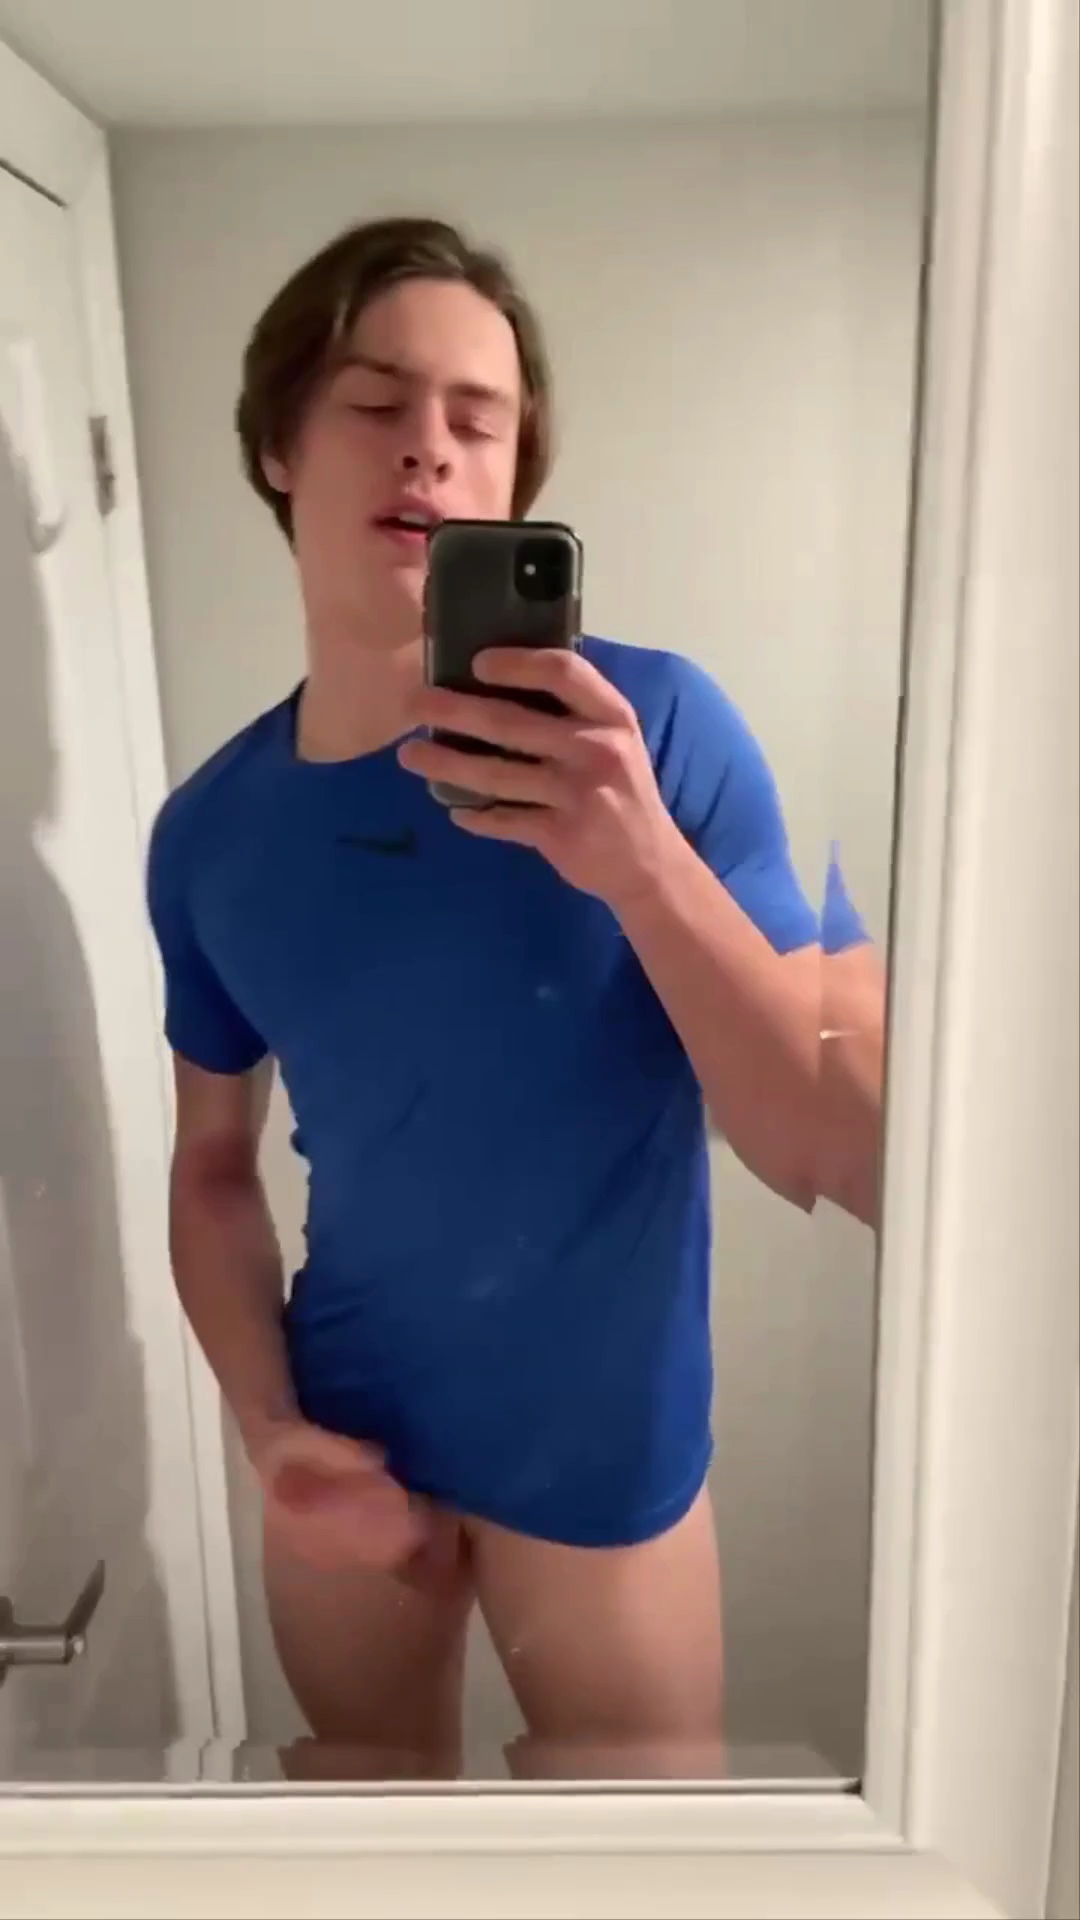 Baited hot longhaired guy jerkoff on toilet